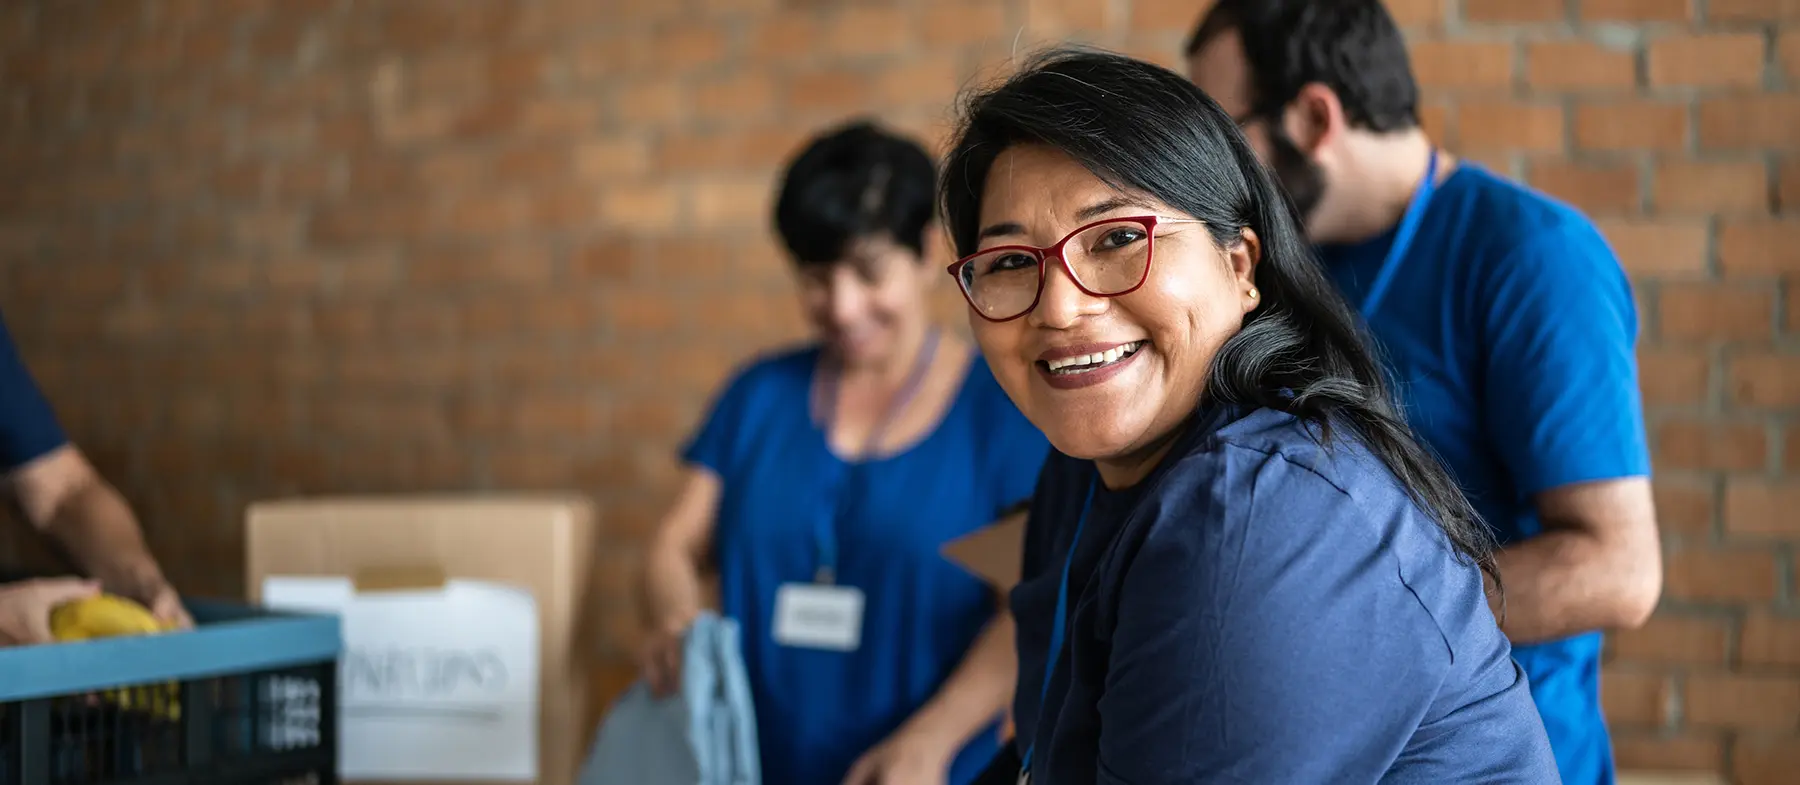 While volunteering with a group of people, a woman looks straight at the camera and smiles.